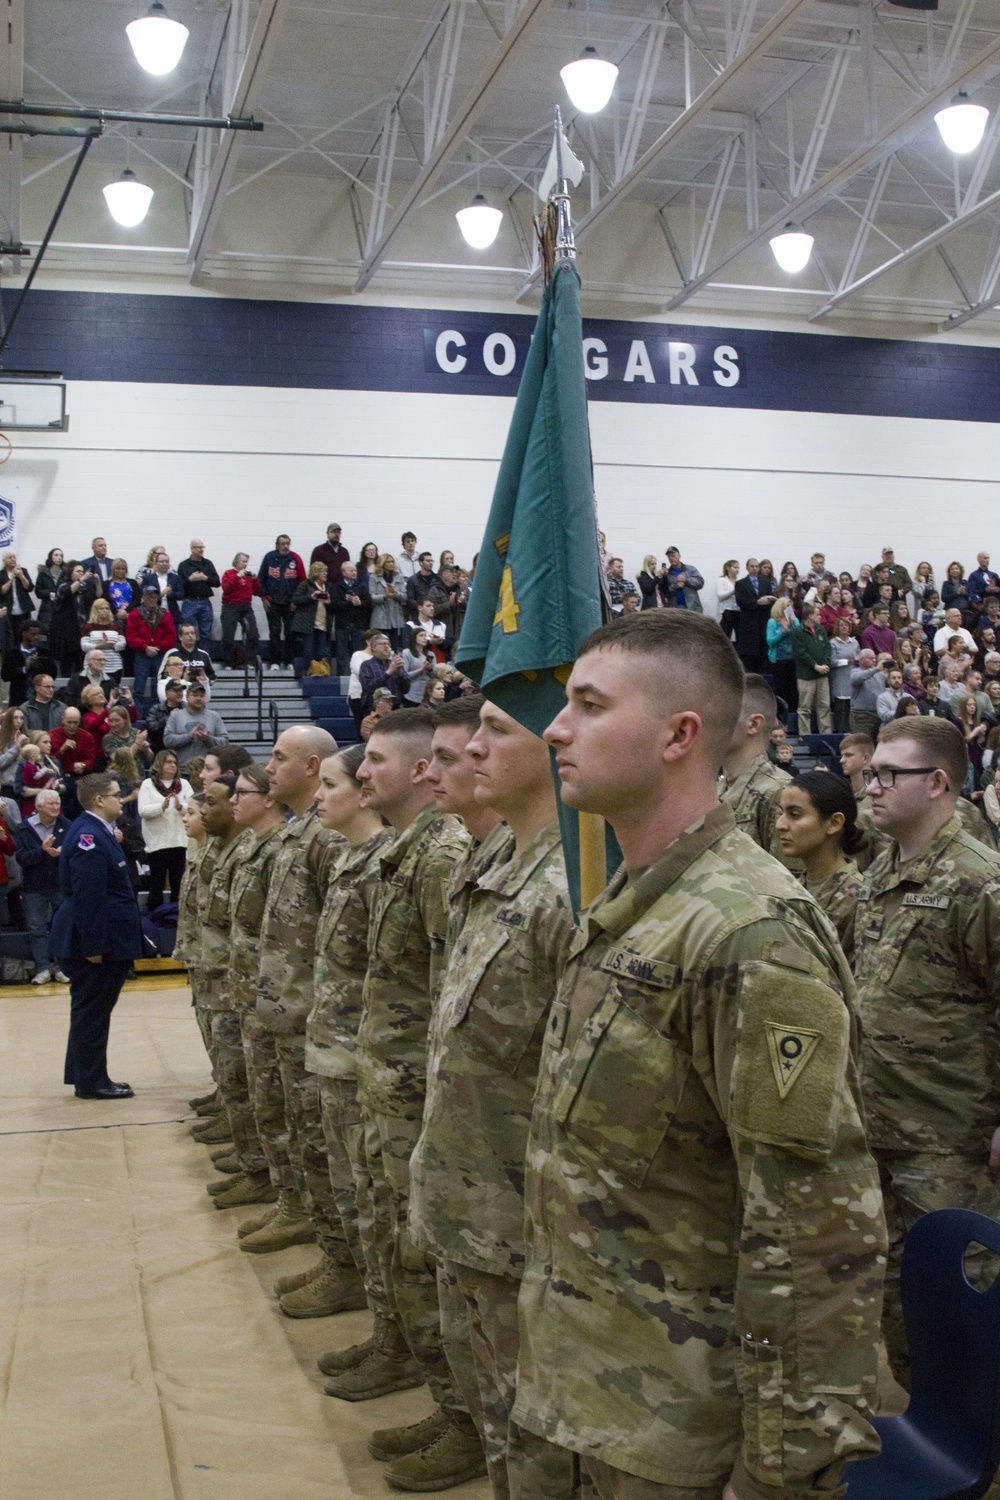 324th Military Police Company deploys in support of U.S. Southern Command